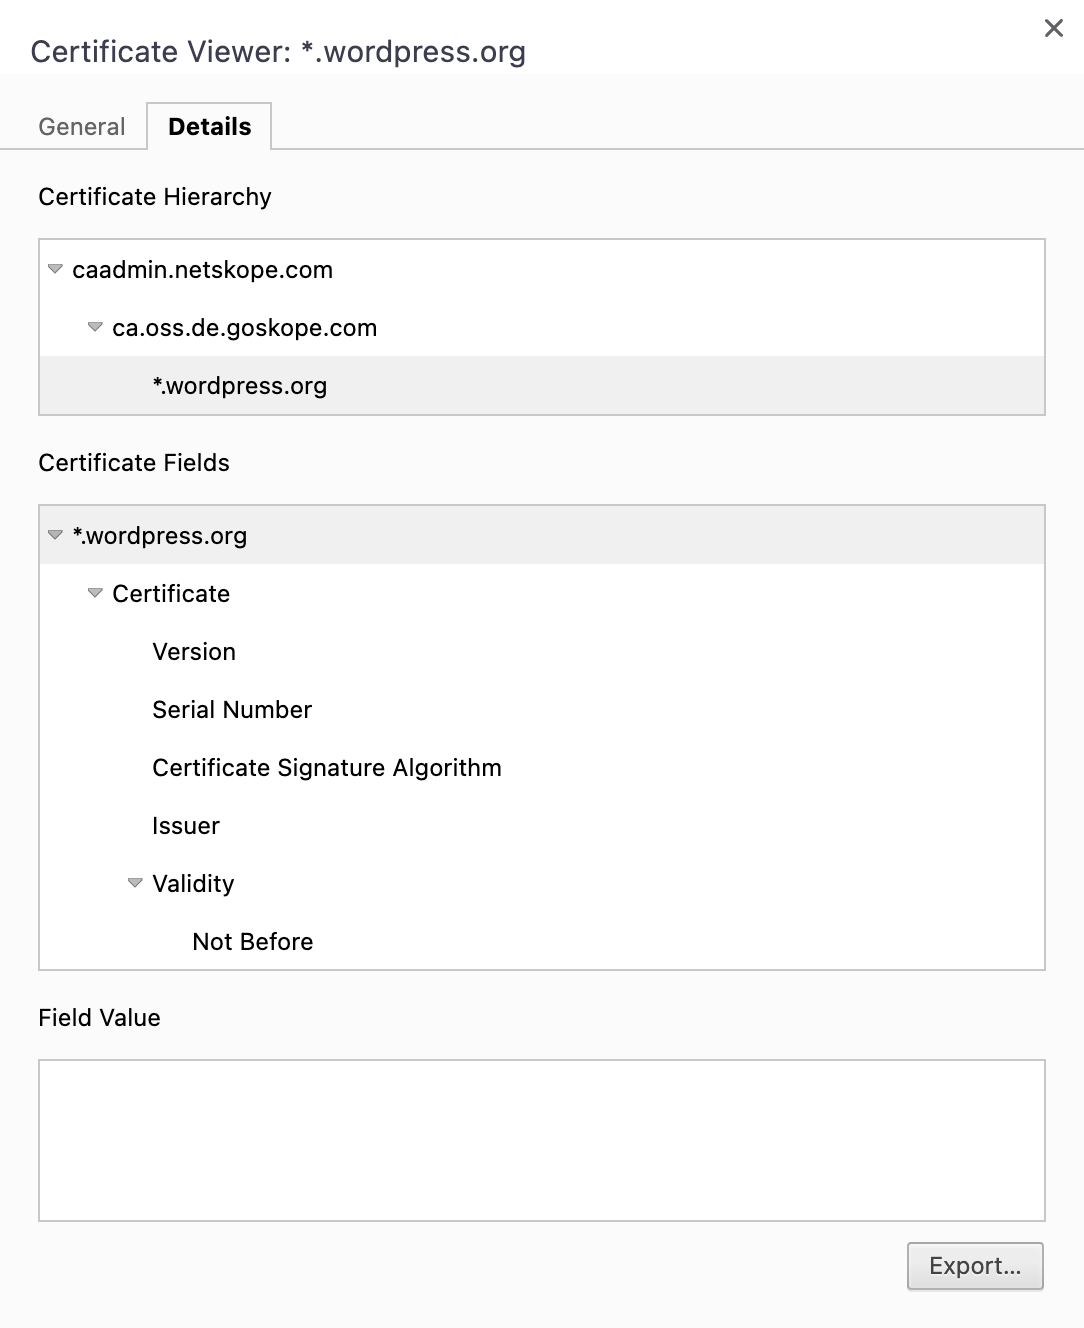 Screenshot of Details tab of Certificate Viewer with Export button at bottom